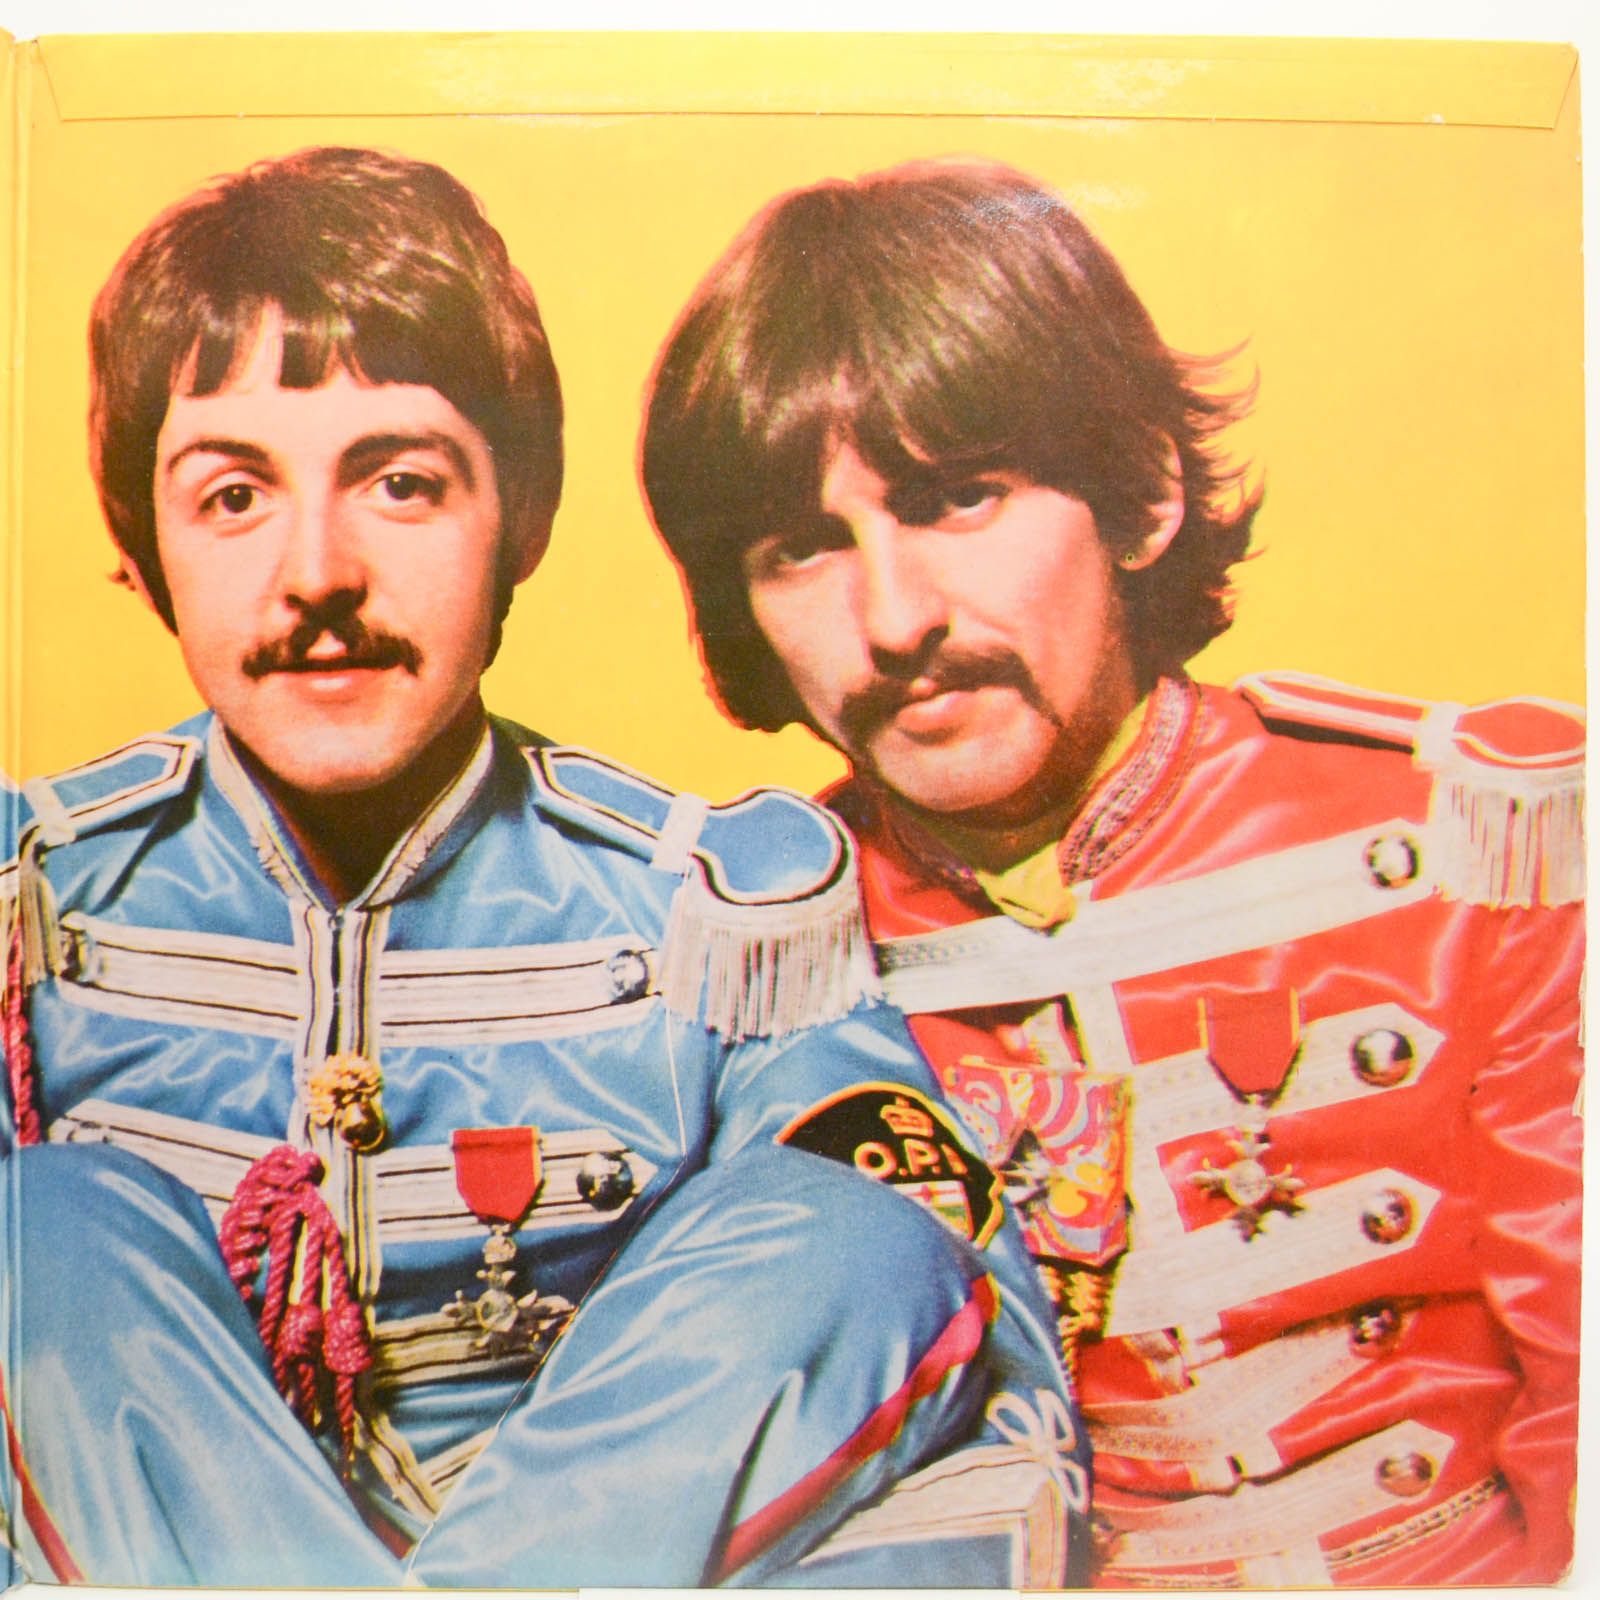 Beatles sgt pepper lonely. The Beatles Sgt. Pepper`s Lonely Hearts Club Band 1967. Sgt Pepper s Lonely Hearts Club Band. Битлз сержант Пеппер. Битлз Sgt Pepper s Lonely Hearts Club Band.